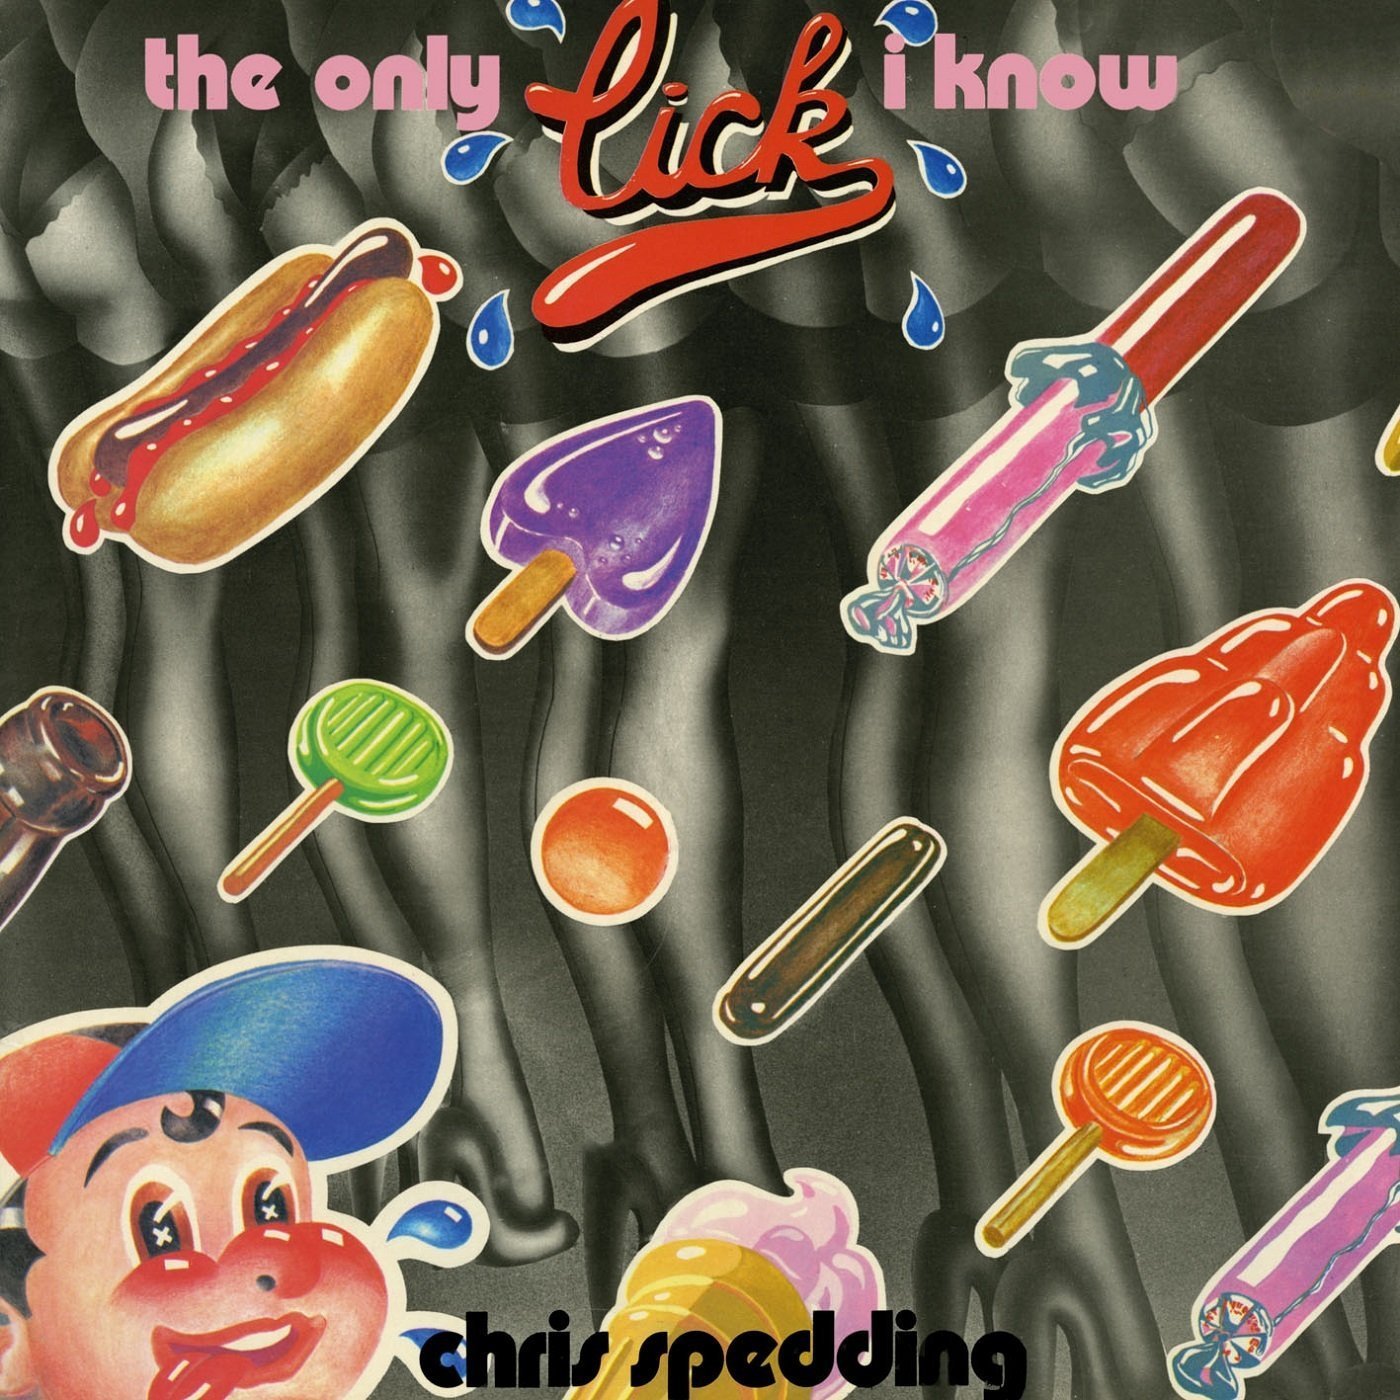 The Only Lick I Know (Remastered Edit.)